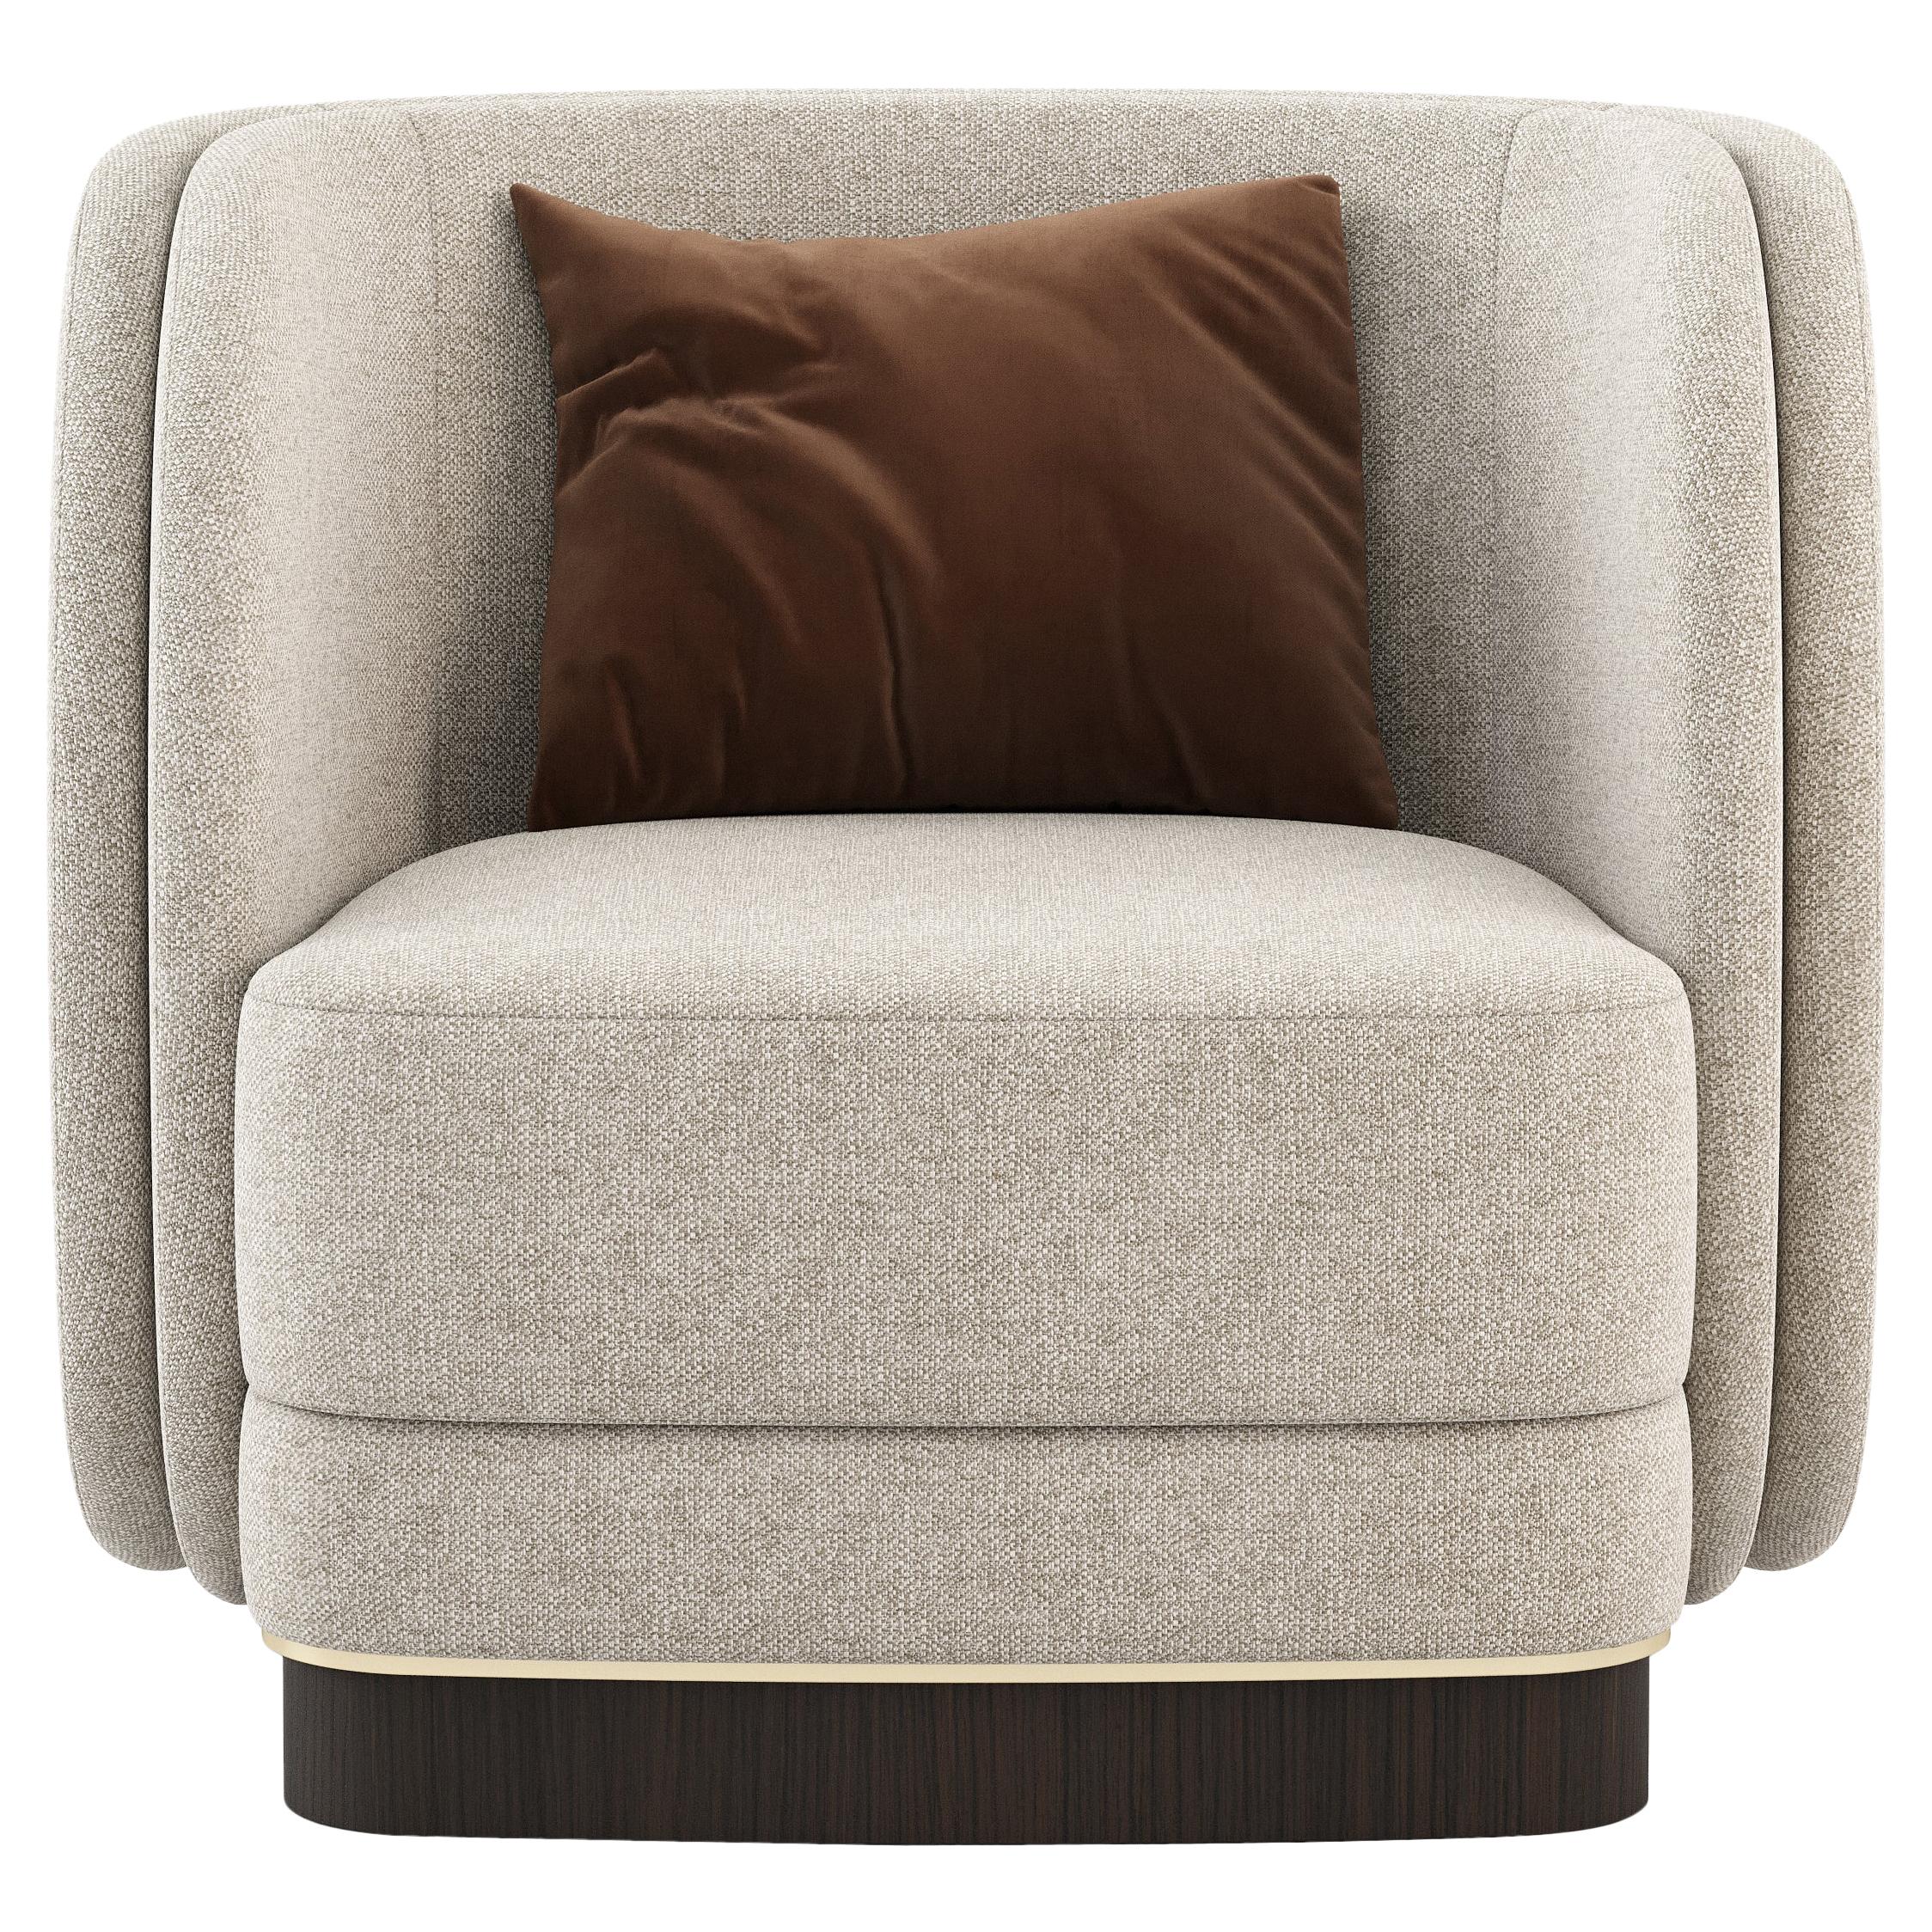 Ambrose Armchair, Portuguese 21st Century Contemporary Upholstered with Leather